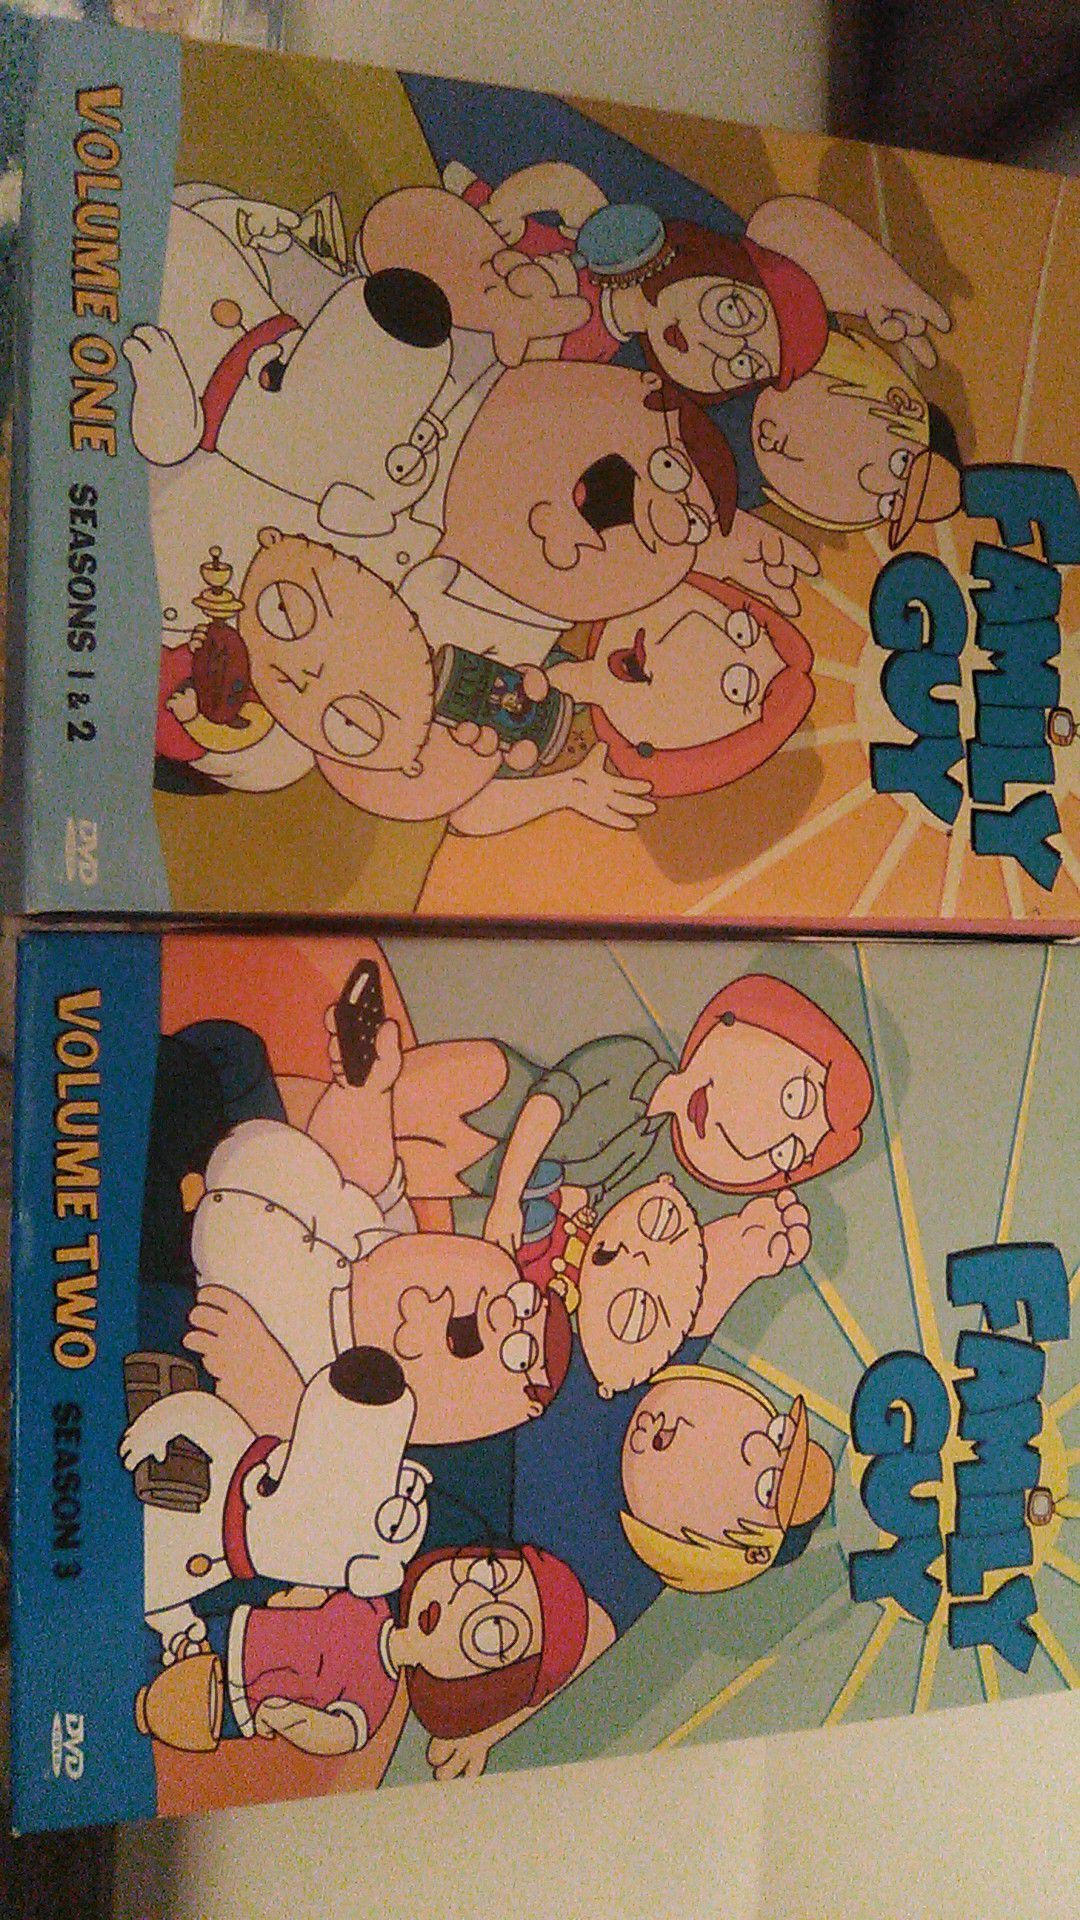 Family Guy volume 1 and 2 seasons 1&2 and 3